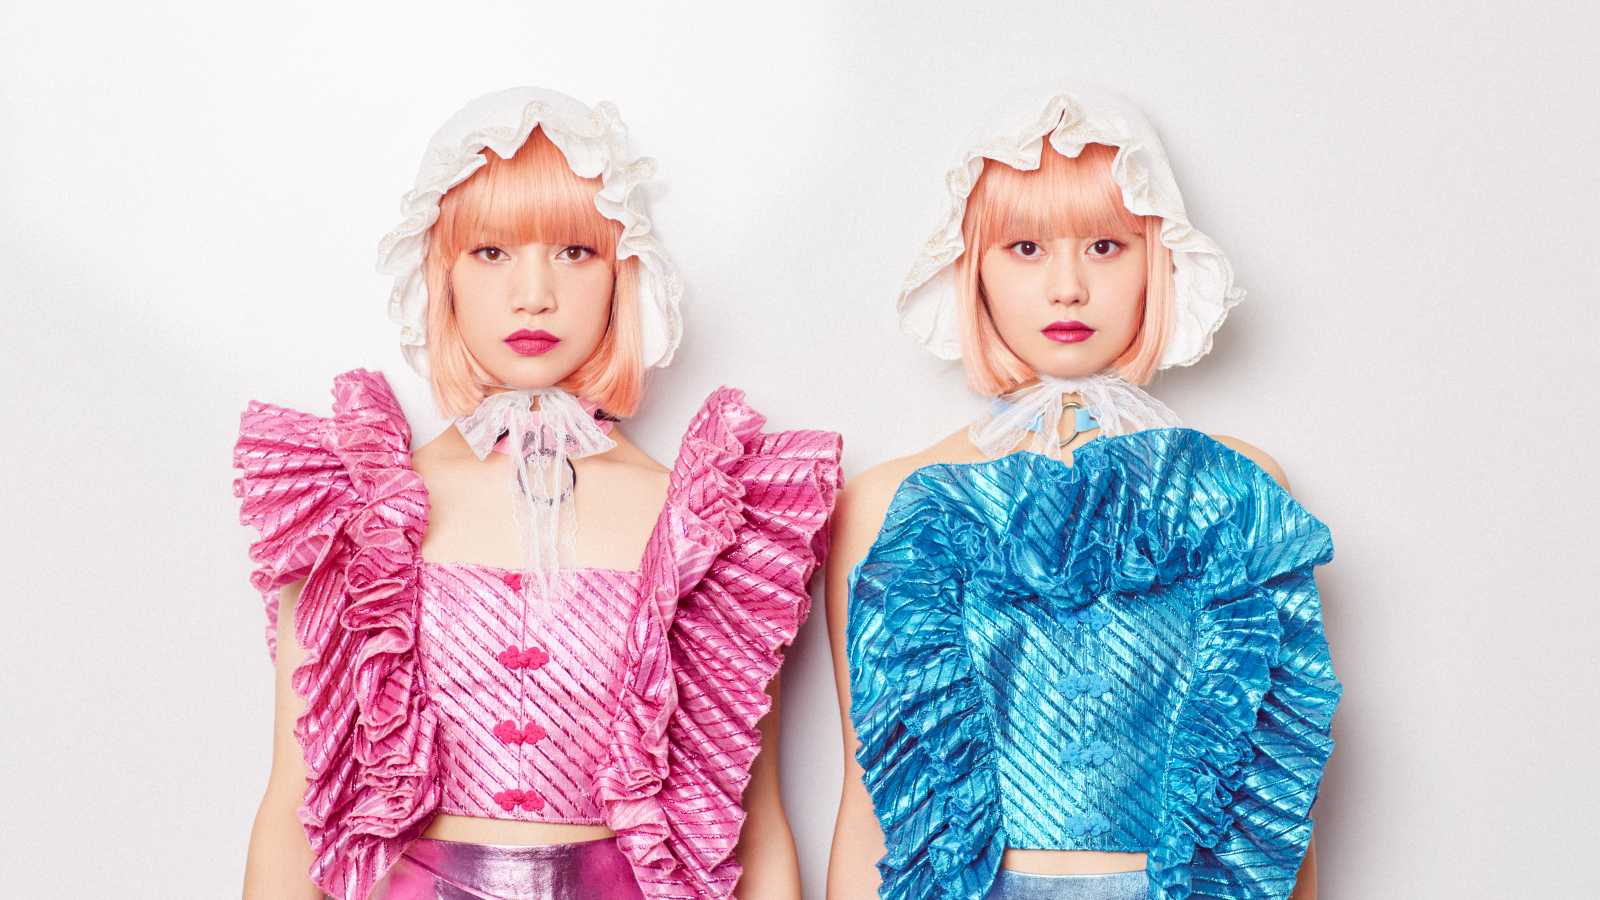 Interview with FEMM © FEMM. All rights reserved.